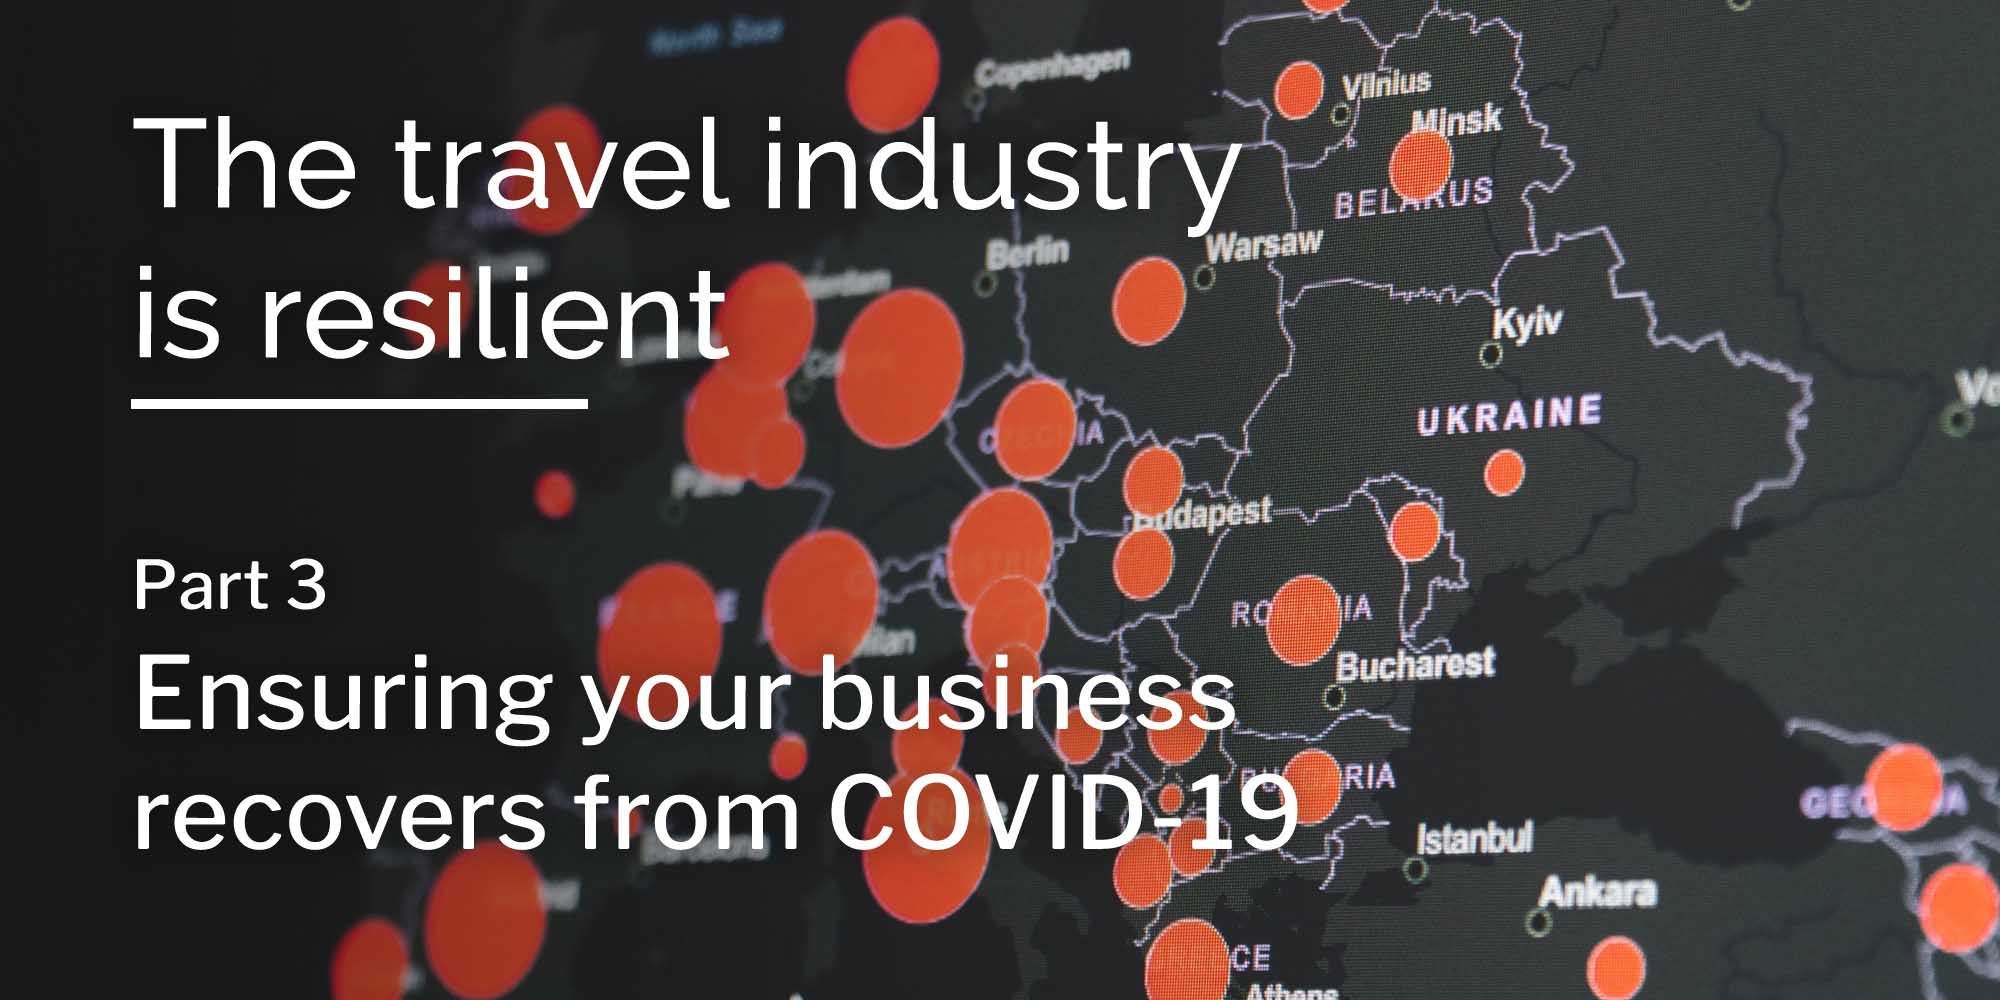 The travel industry is resilient: Ensuring your business recovers from COVID-19